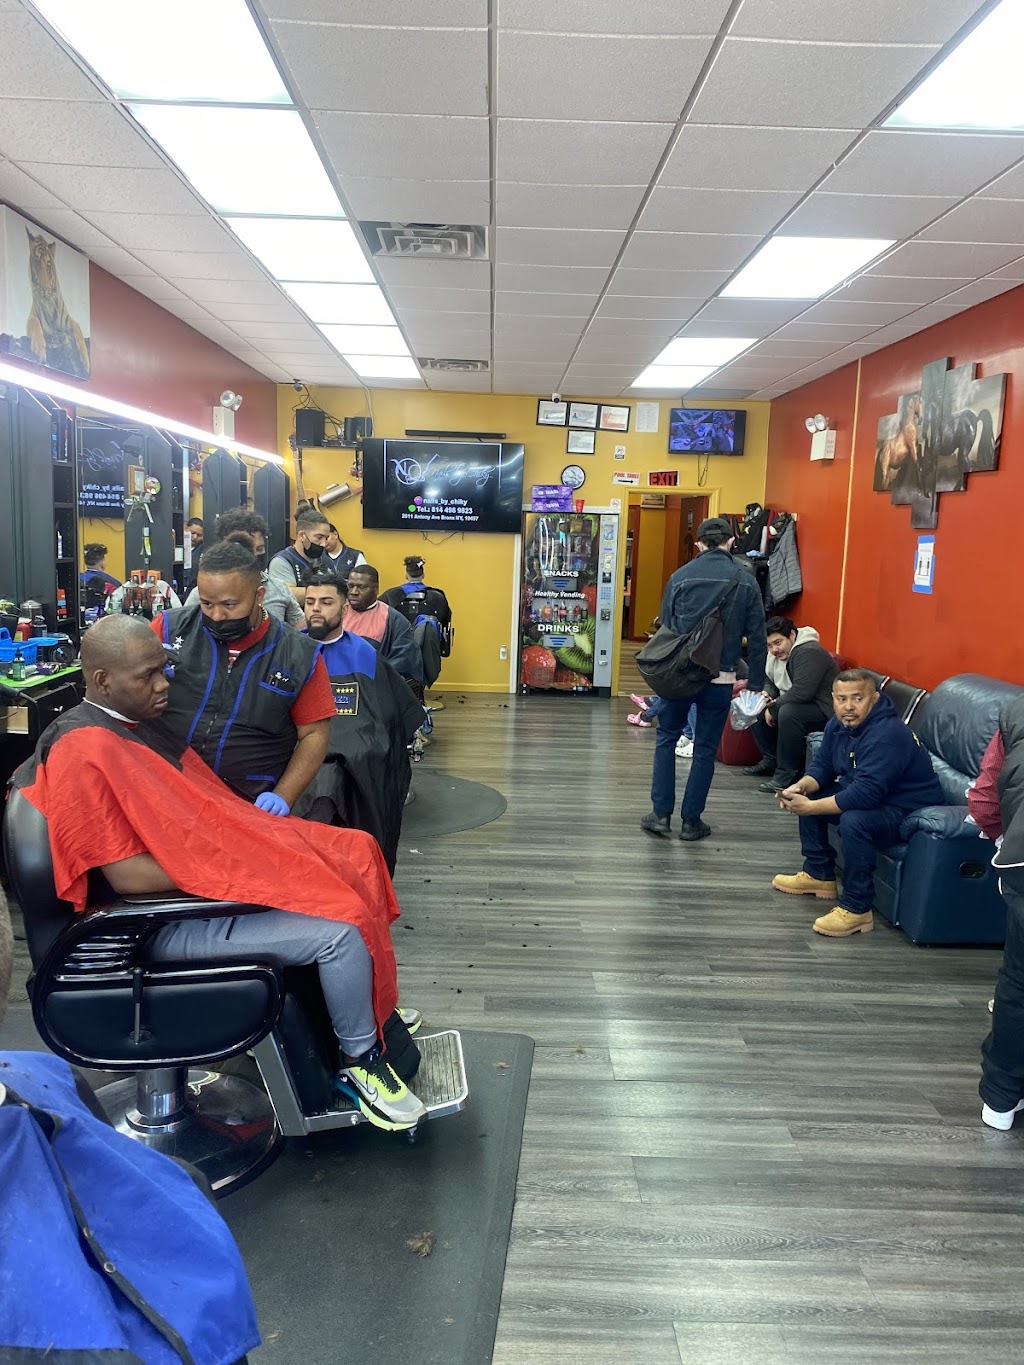 Lewis Barbershop | 898 Old Country Rd, Westbury, NY 11590, USA | Phone: (516) 280-8678